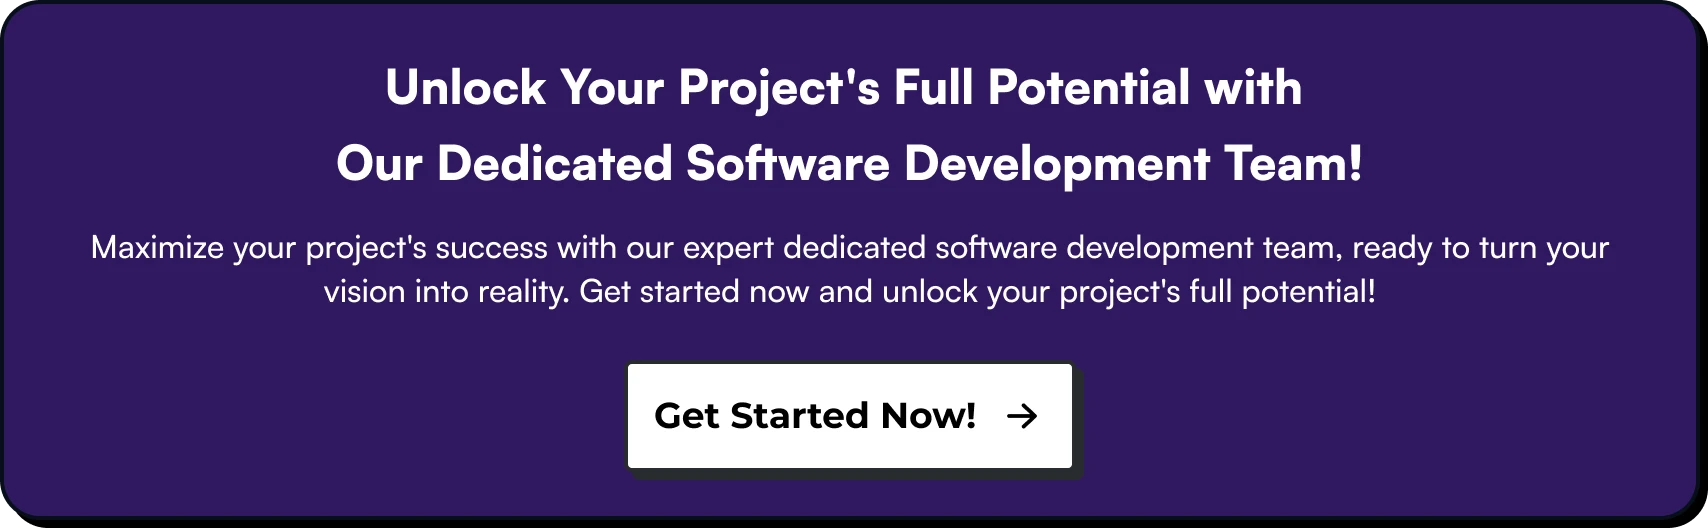 Unlock Your Project's Full Potential with Our Dedicated Software Development Team